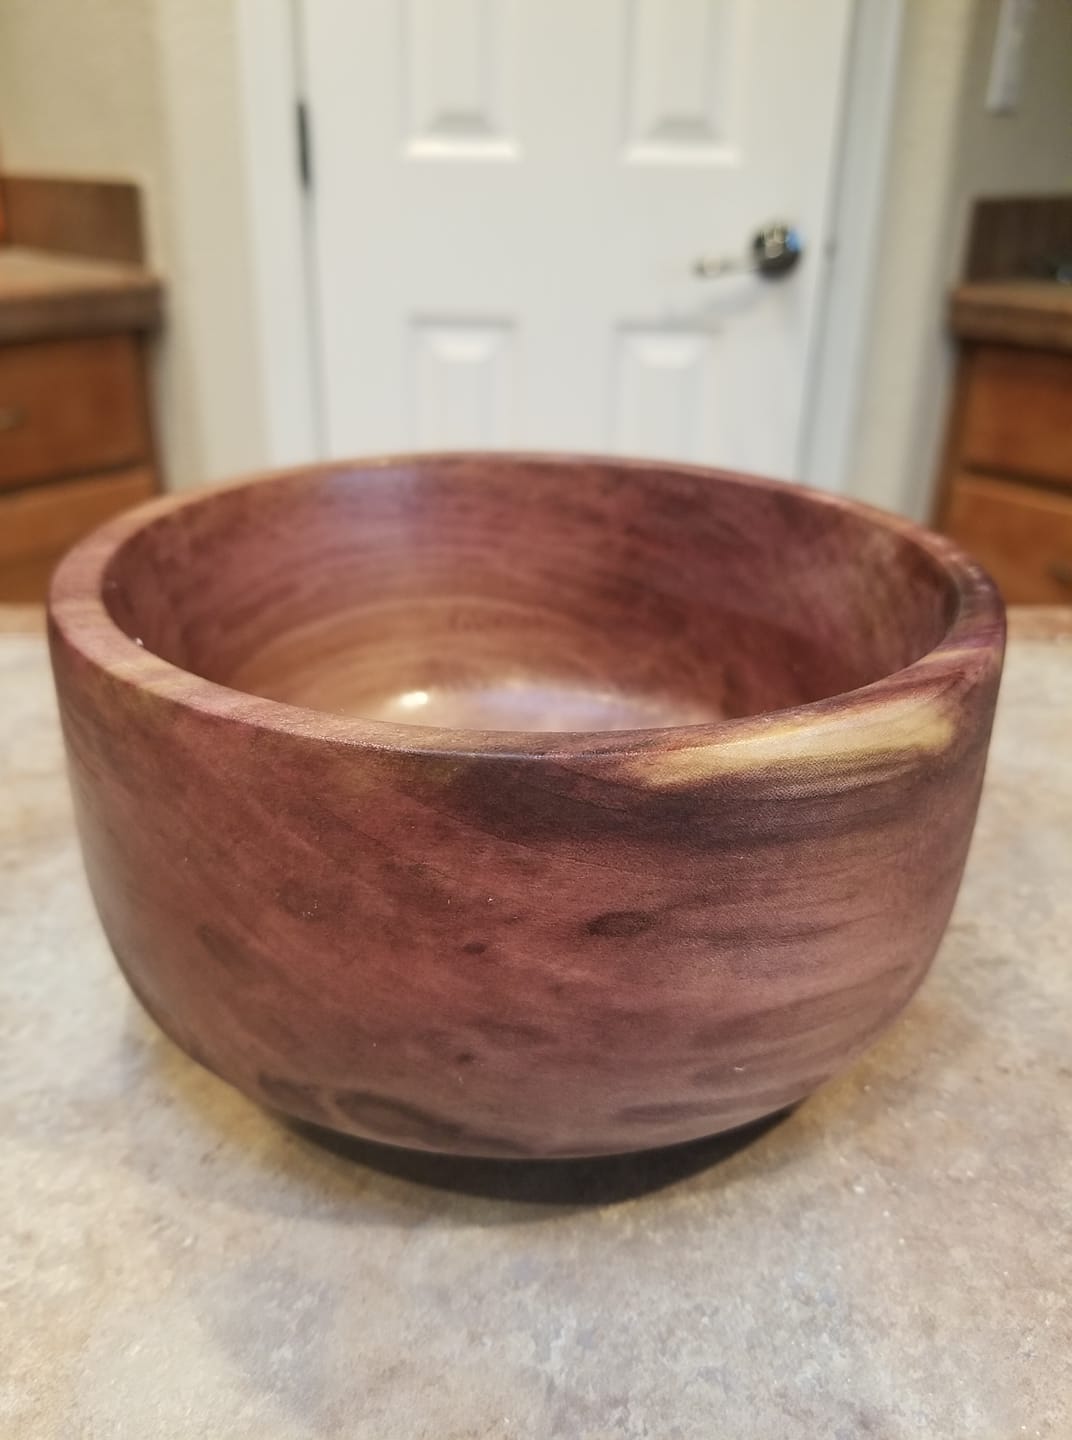 First bowl